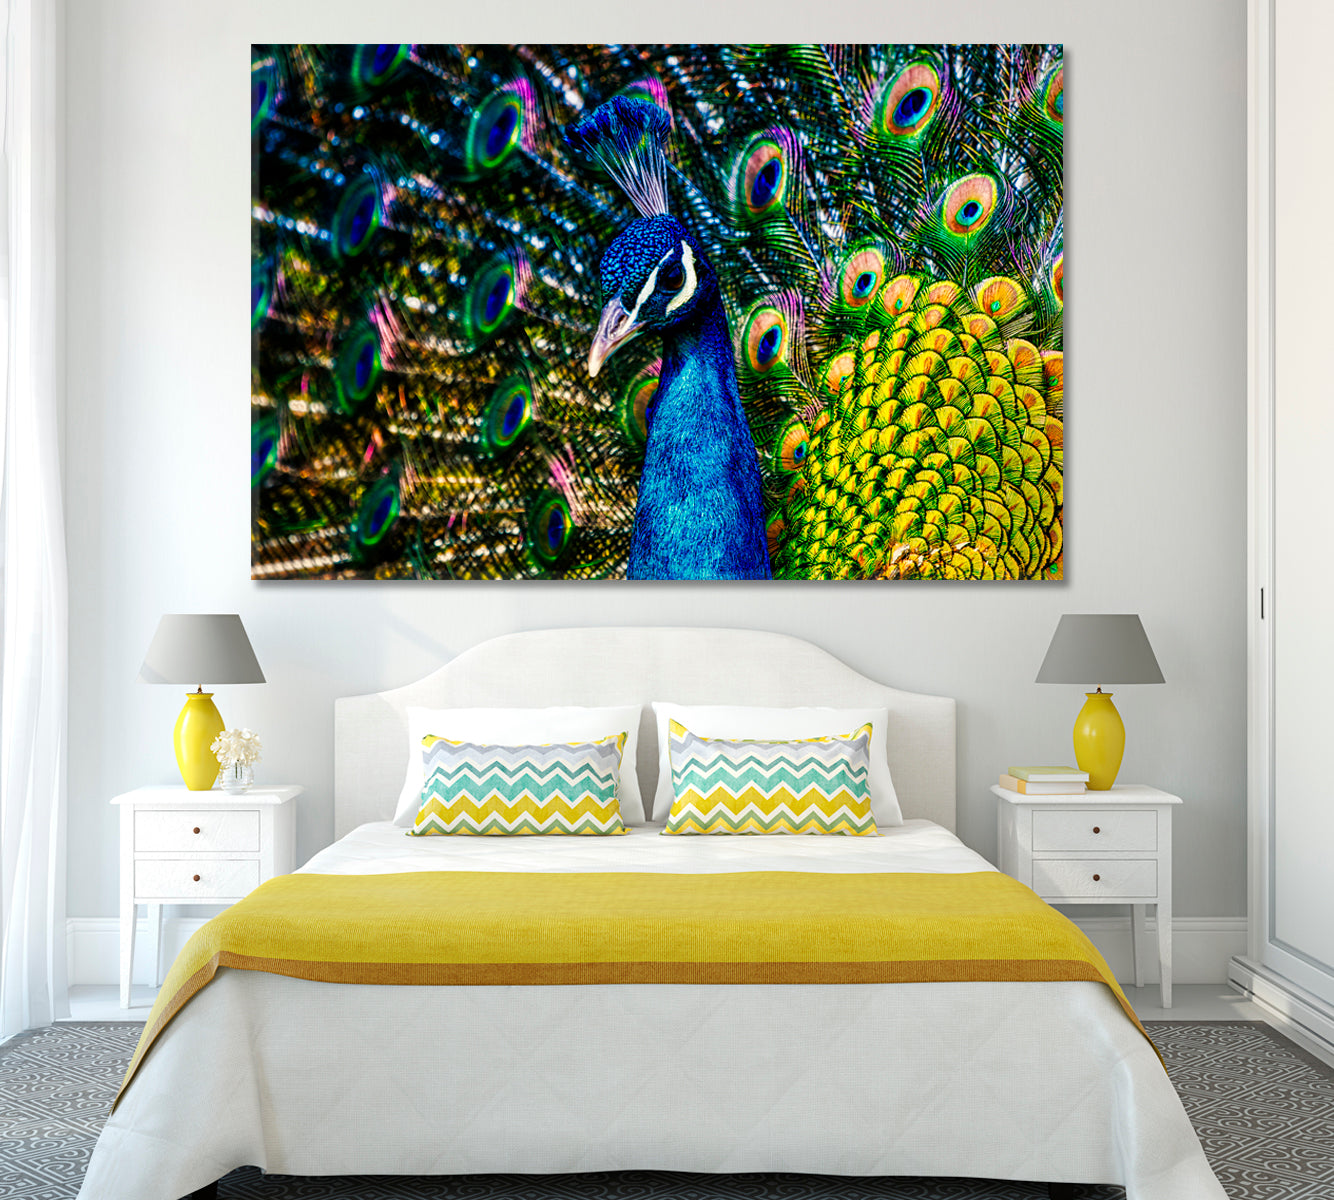 Peacock with Open Tail Canvas Print ArtLexy 1 Panel 24"x16" inches 